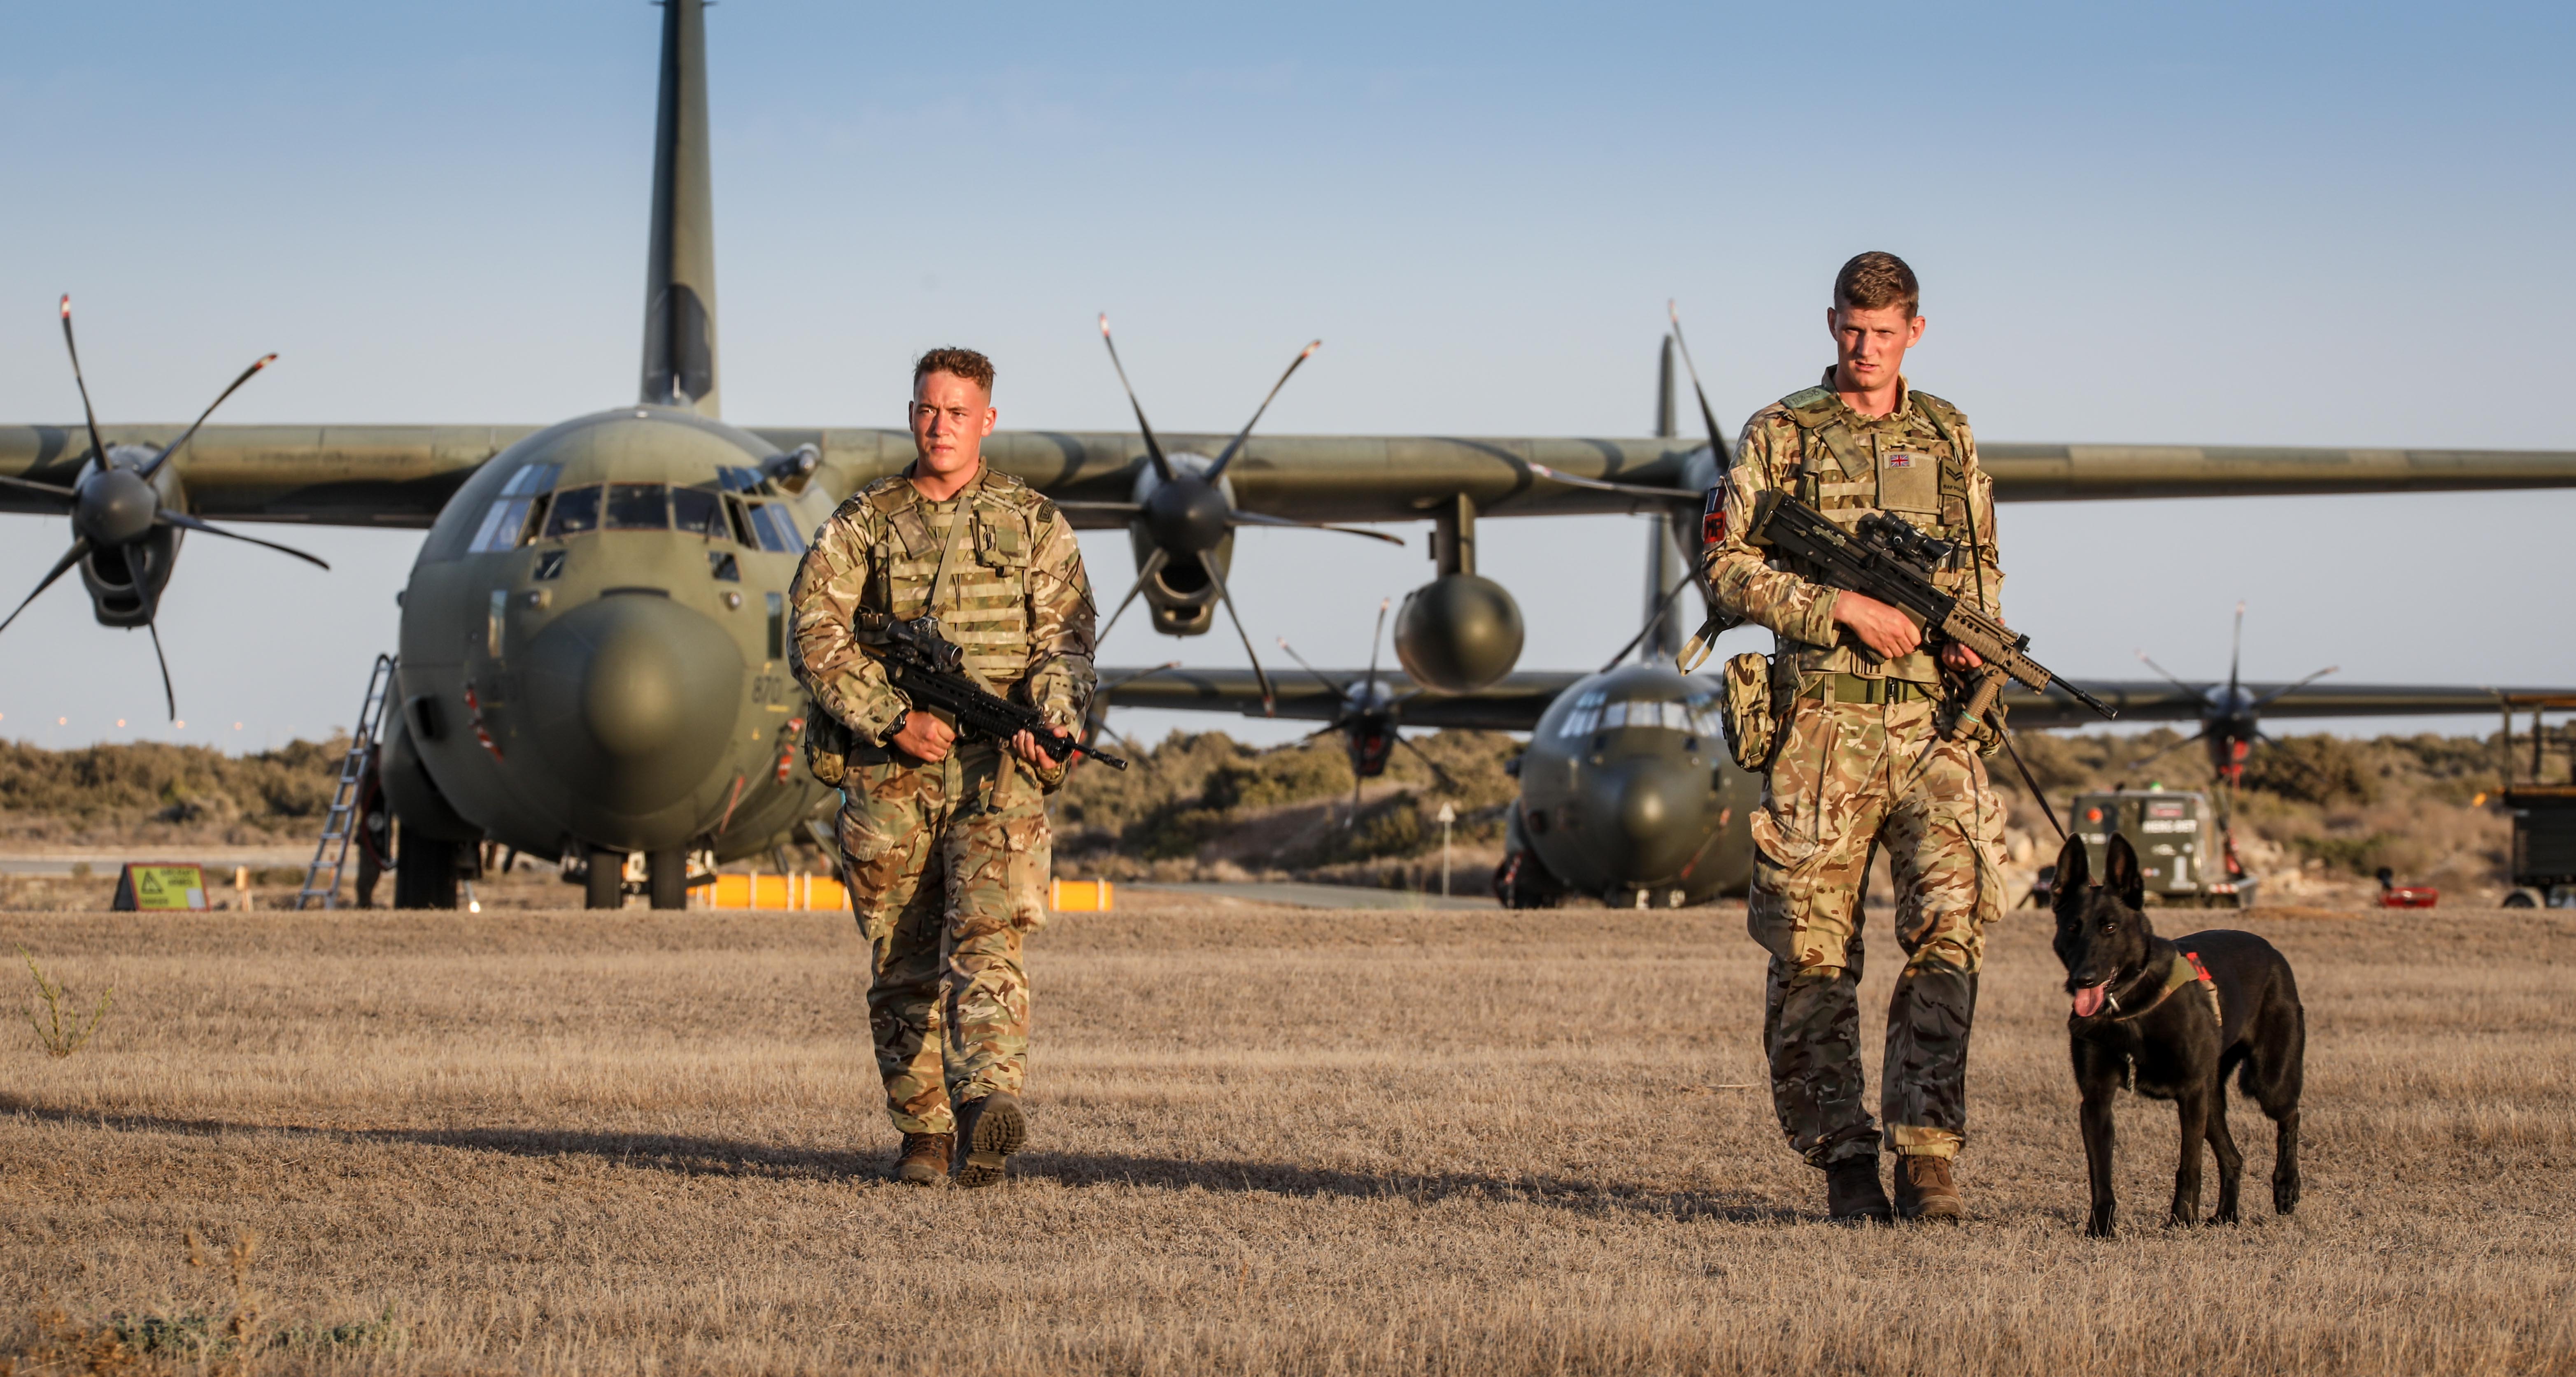 Personnel walk with Military Working Dogs and rifles, in front of Atlas aircraft.